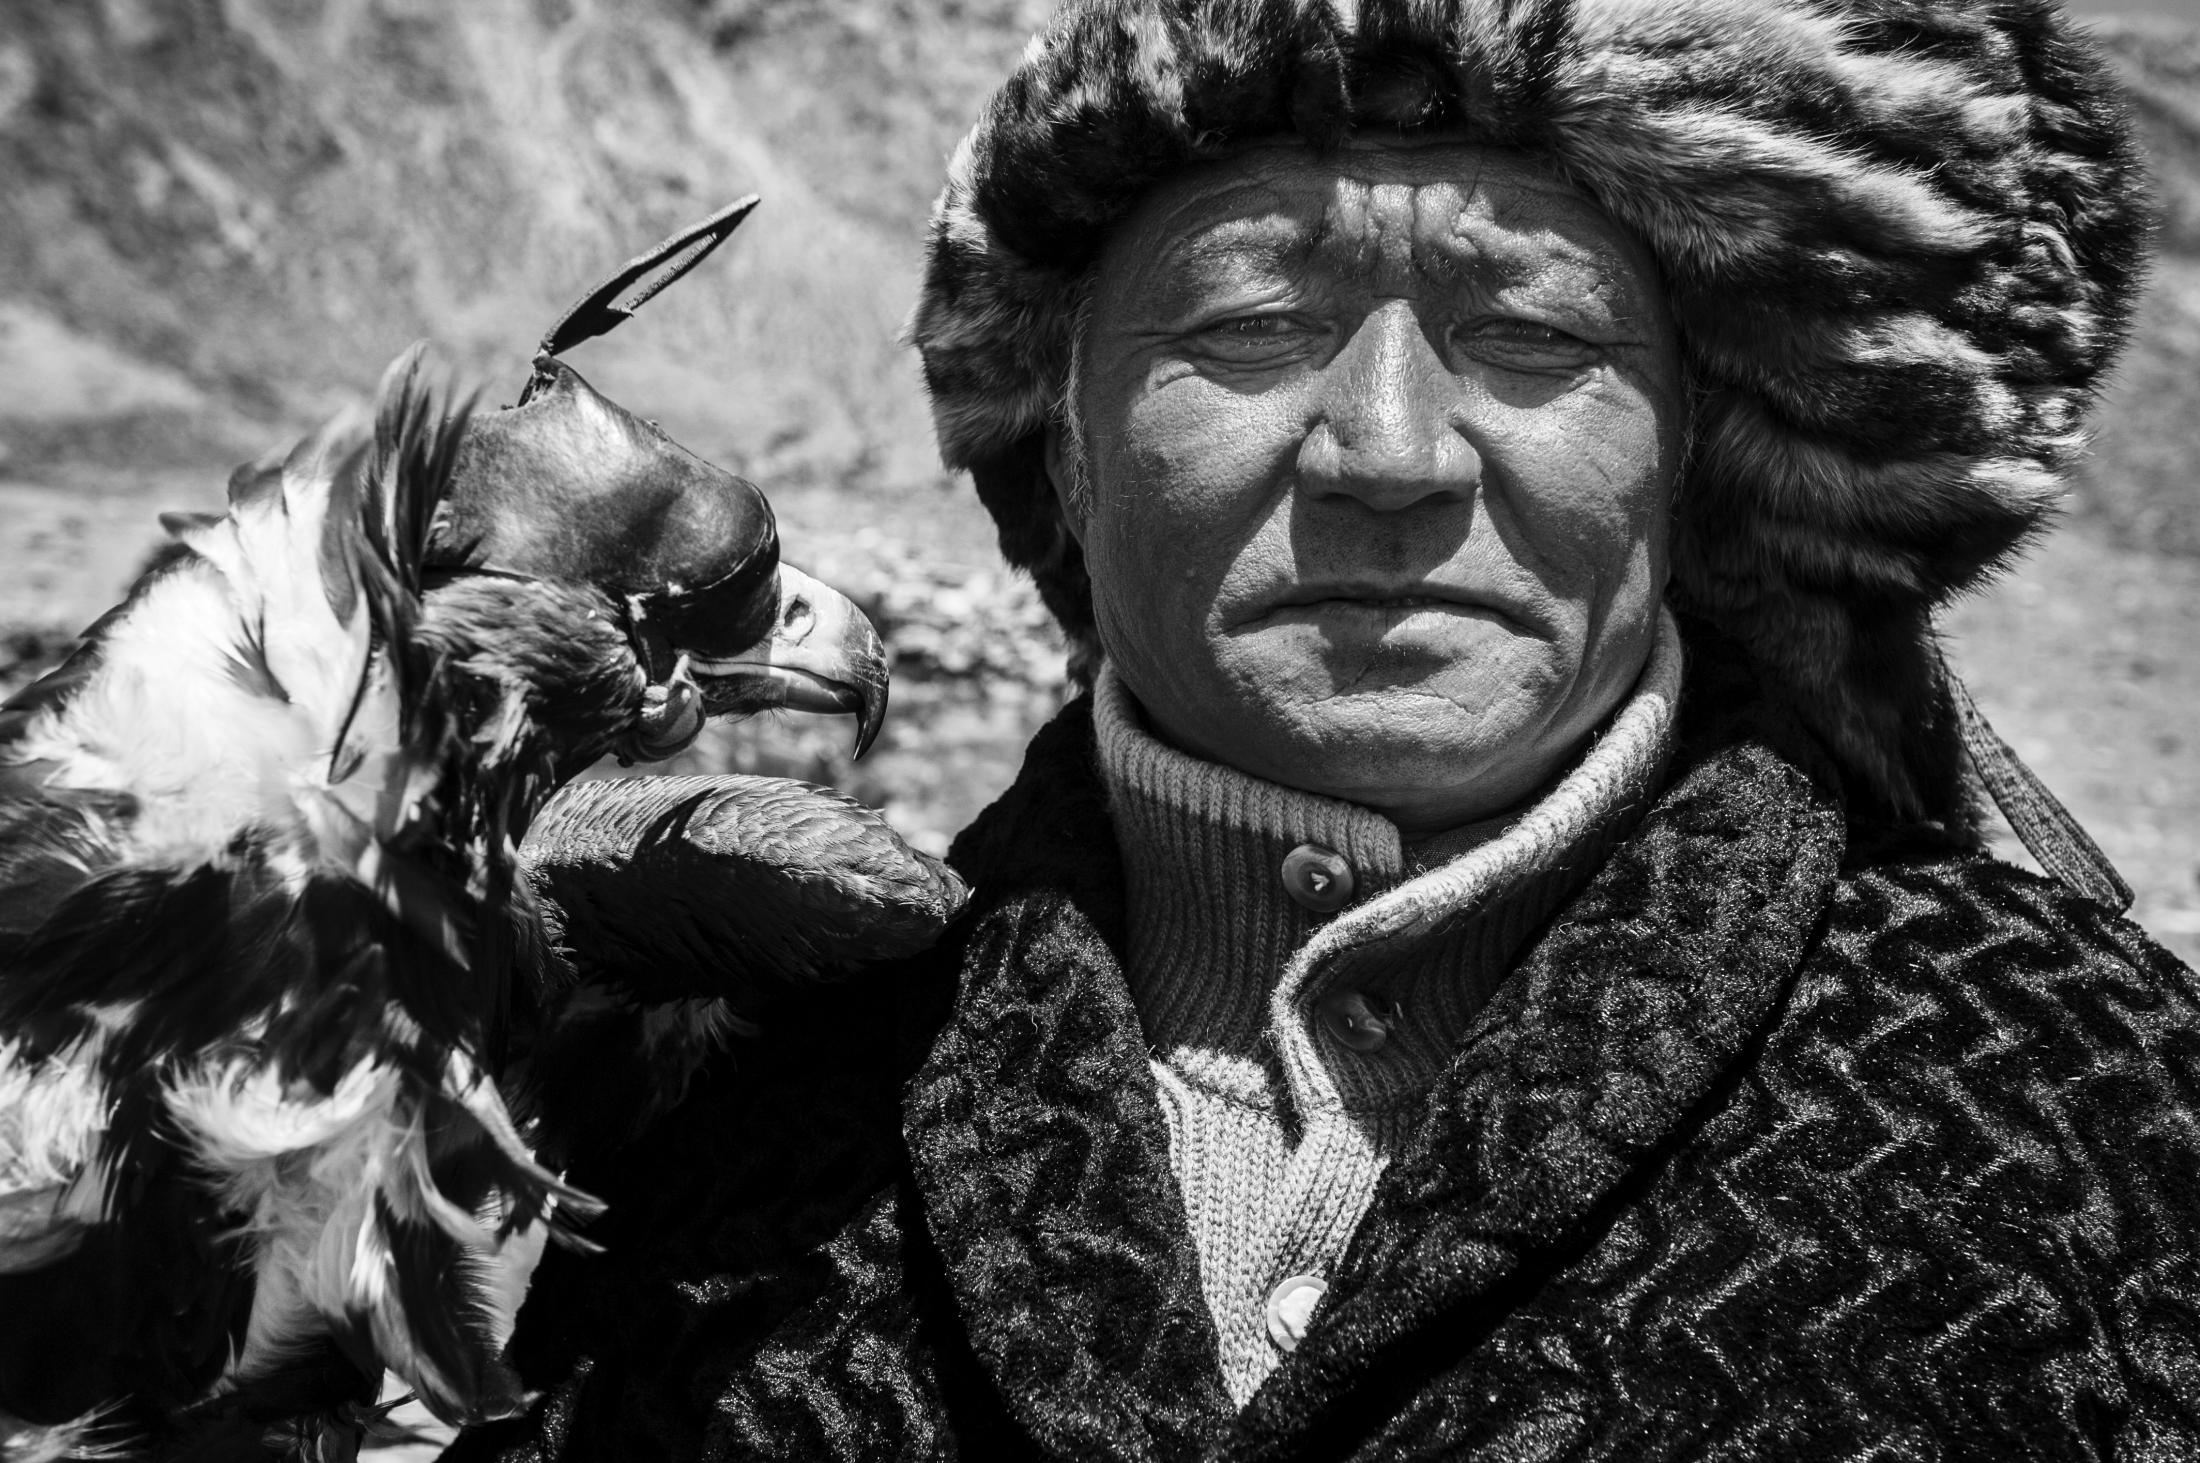  Pride.&nbsp; It is status among Kazahk people to own an eagle. In tradition hunters wear fox fur hats cought by their closest hunting friend.